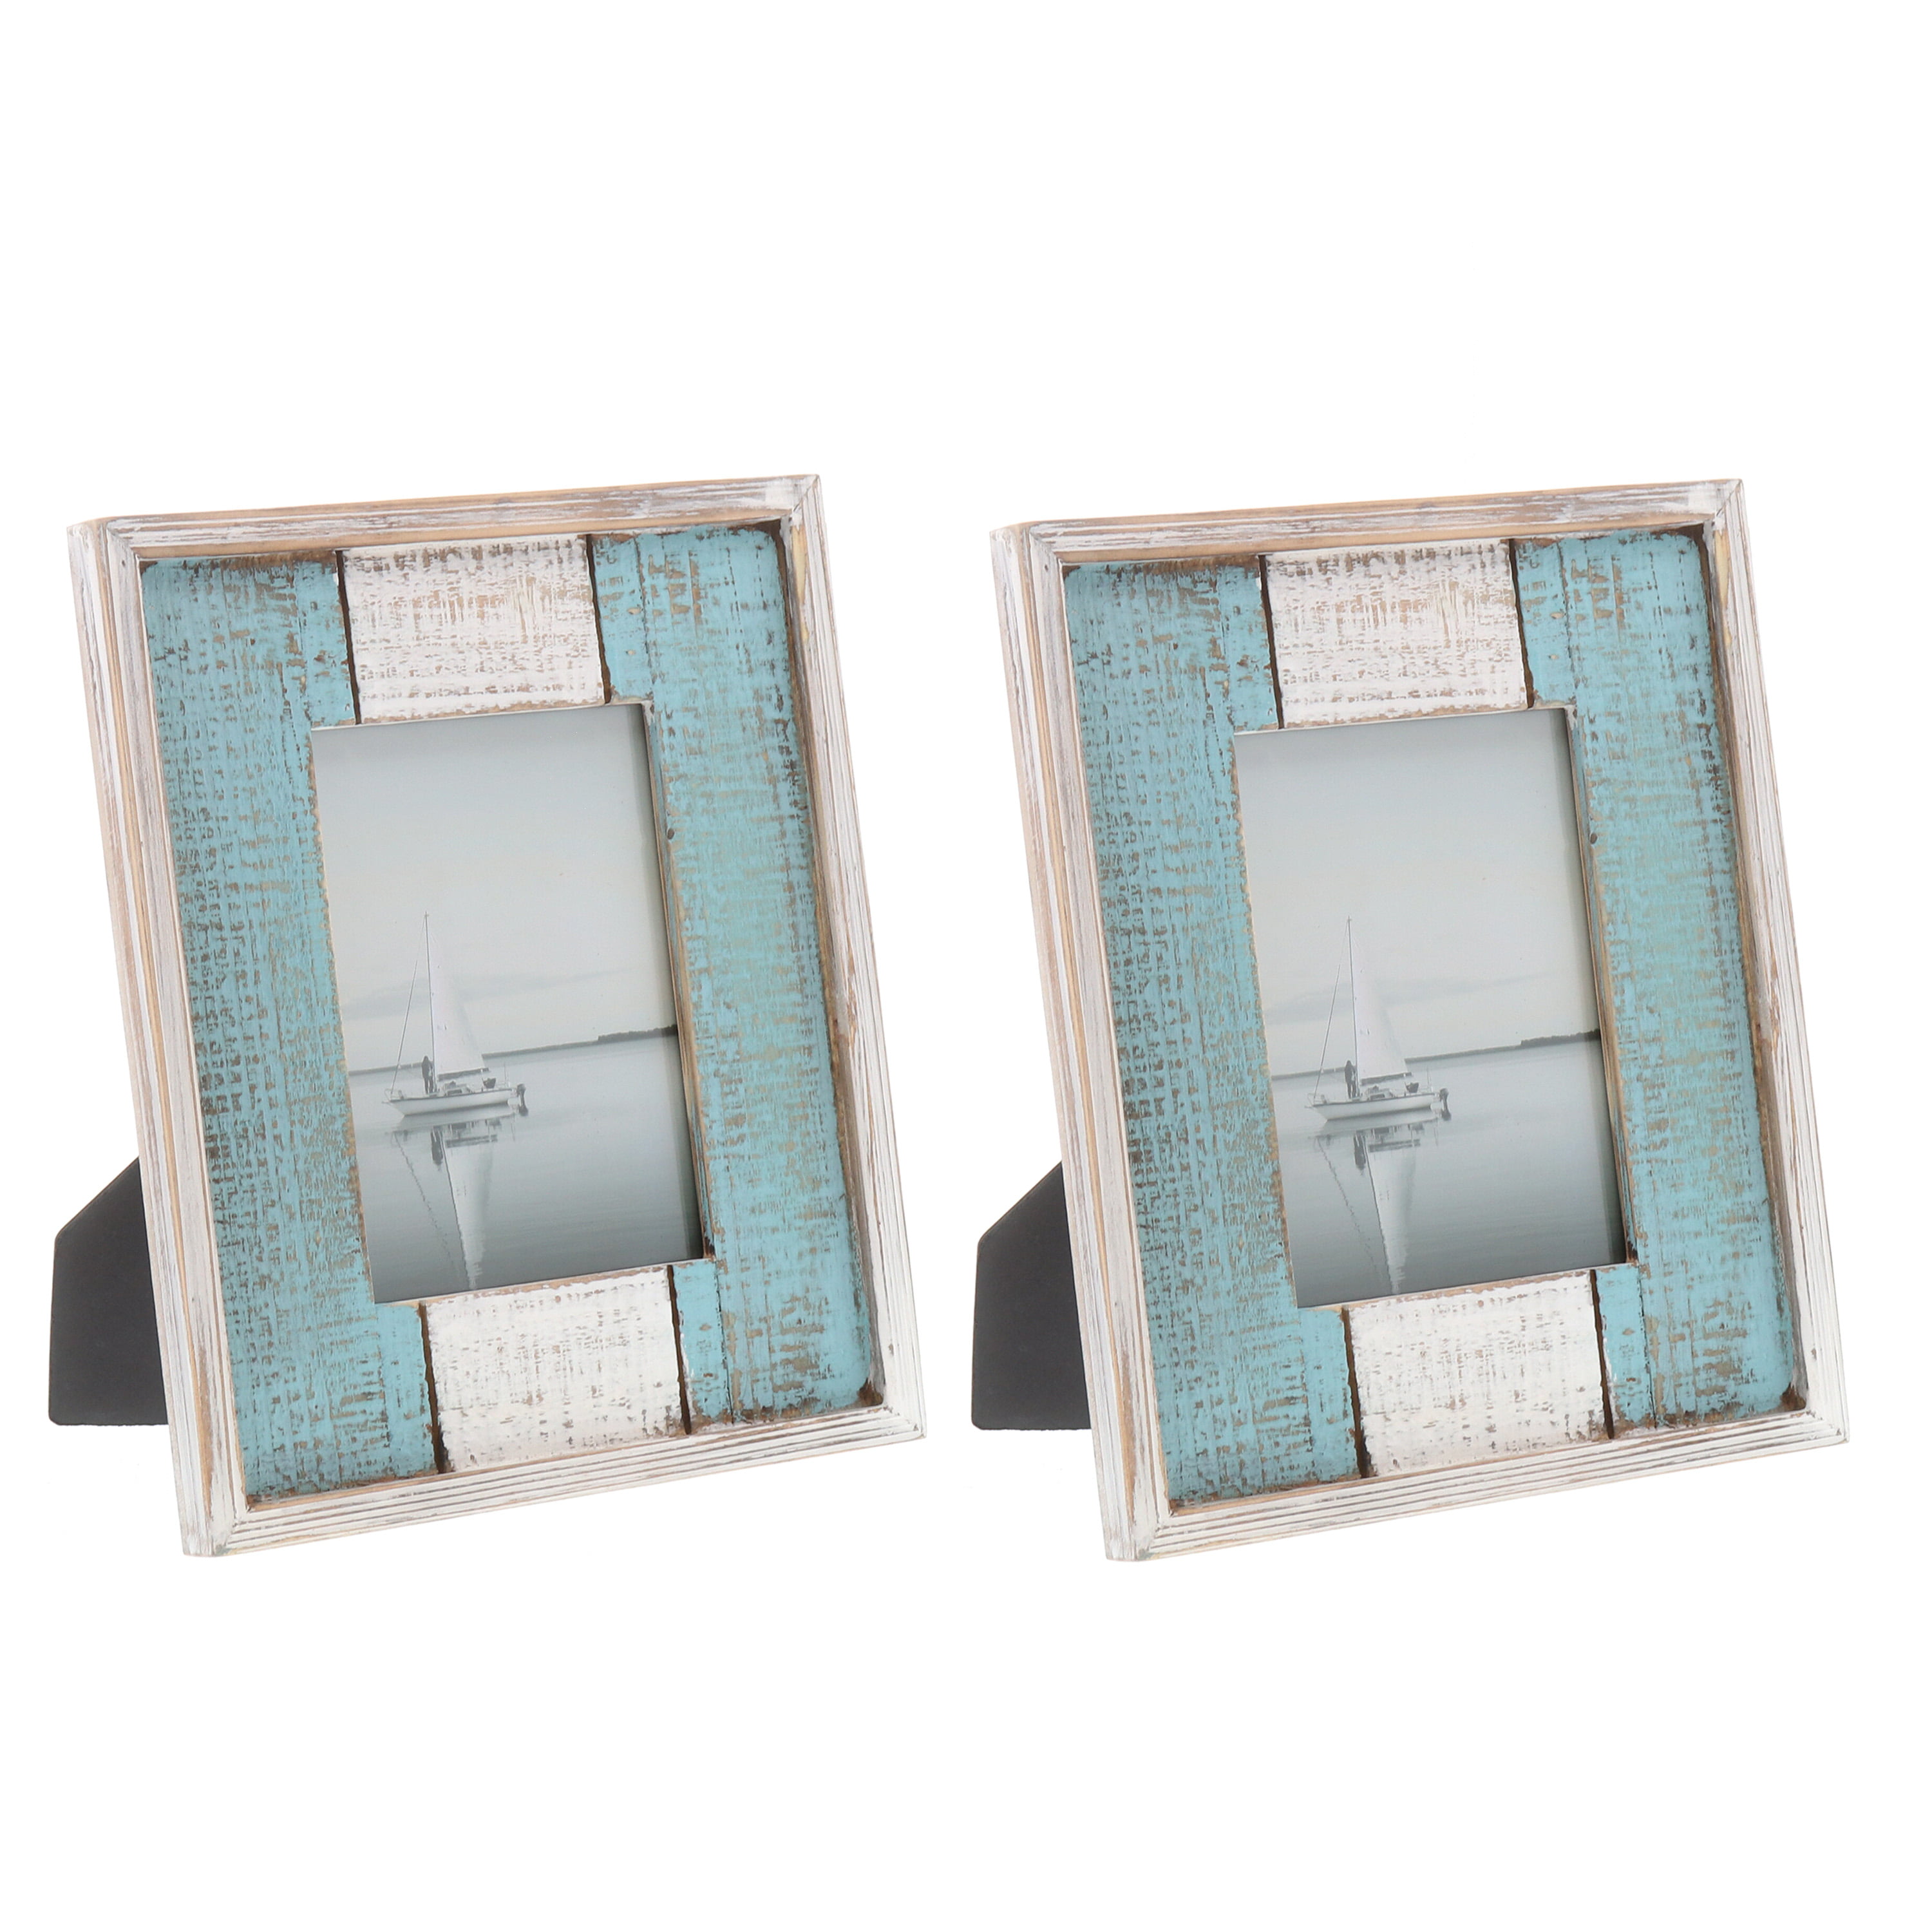 3-Pack Details about   5x7 Picture Frame Rustic Distressed Industrial Frames Modern 5x7 Frame 